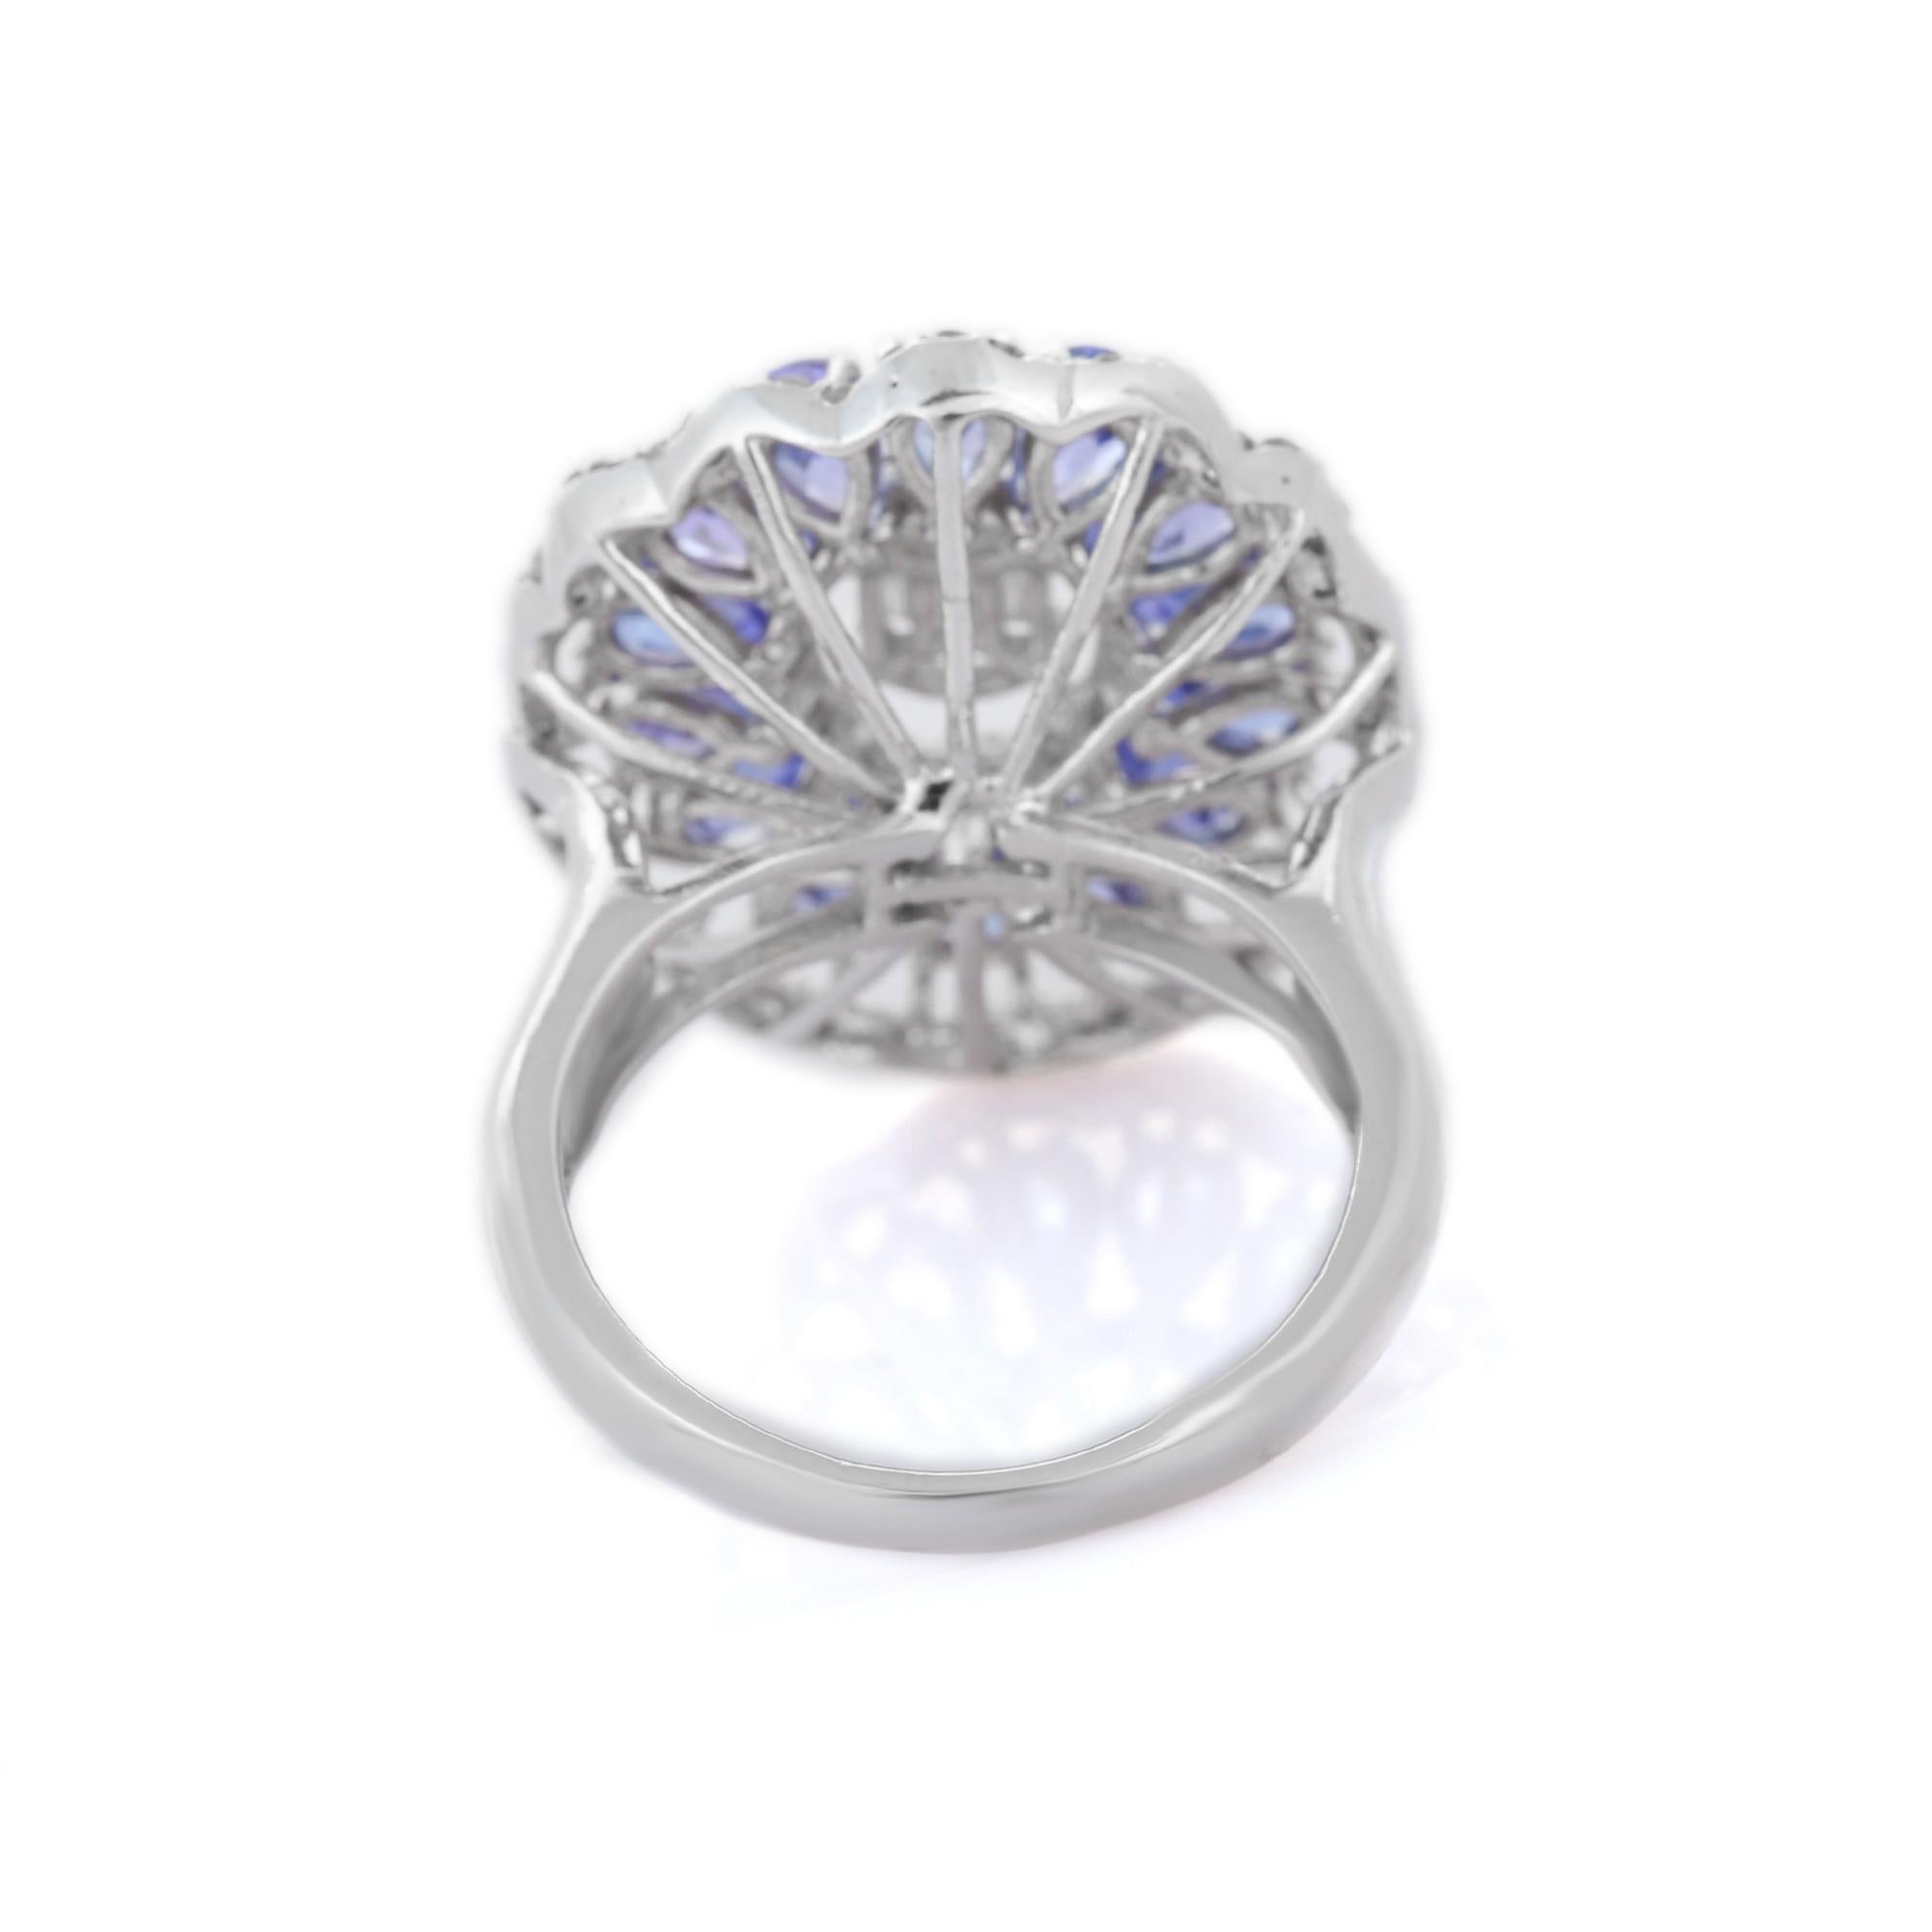 For Sale:  18K White Gold 2.26 ct Blue Sapphire Floral Cocktail Wedding Ring with Diamonds 3